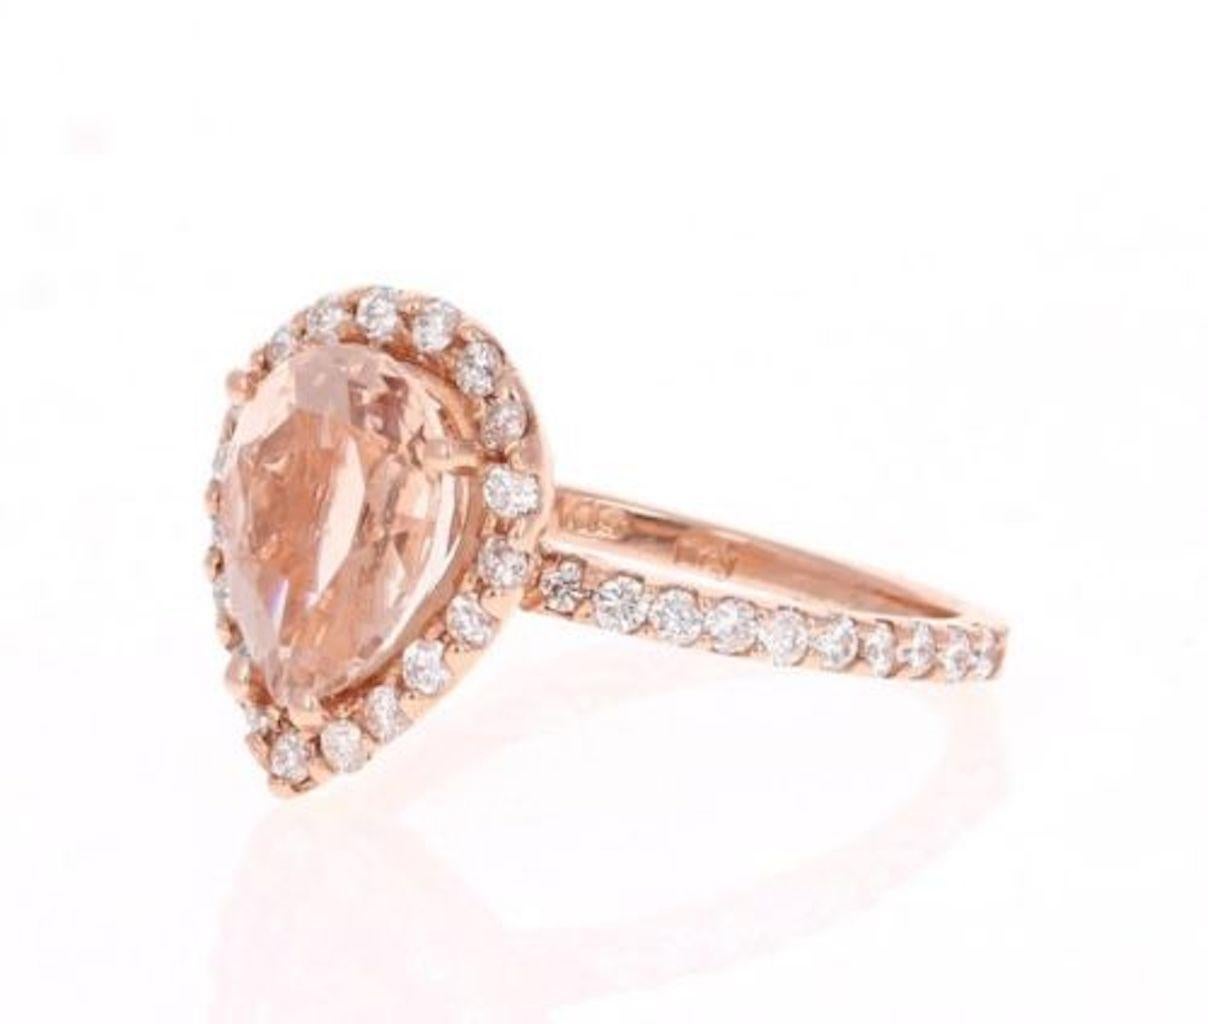 3.70 Carats Exquisite Natural Morganite and Diamond 14K Solid Rose Gold Ring

Total Natural Pear Shaped Morganite Weights: Approx. 3.00 Carats

Morganite Measures: Approx. 10.00 x 7.00mm

Morganite Treatment: Heat

Natural Round Diamonds Weight: